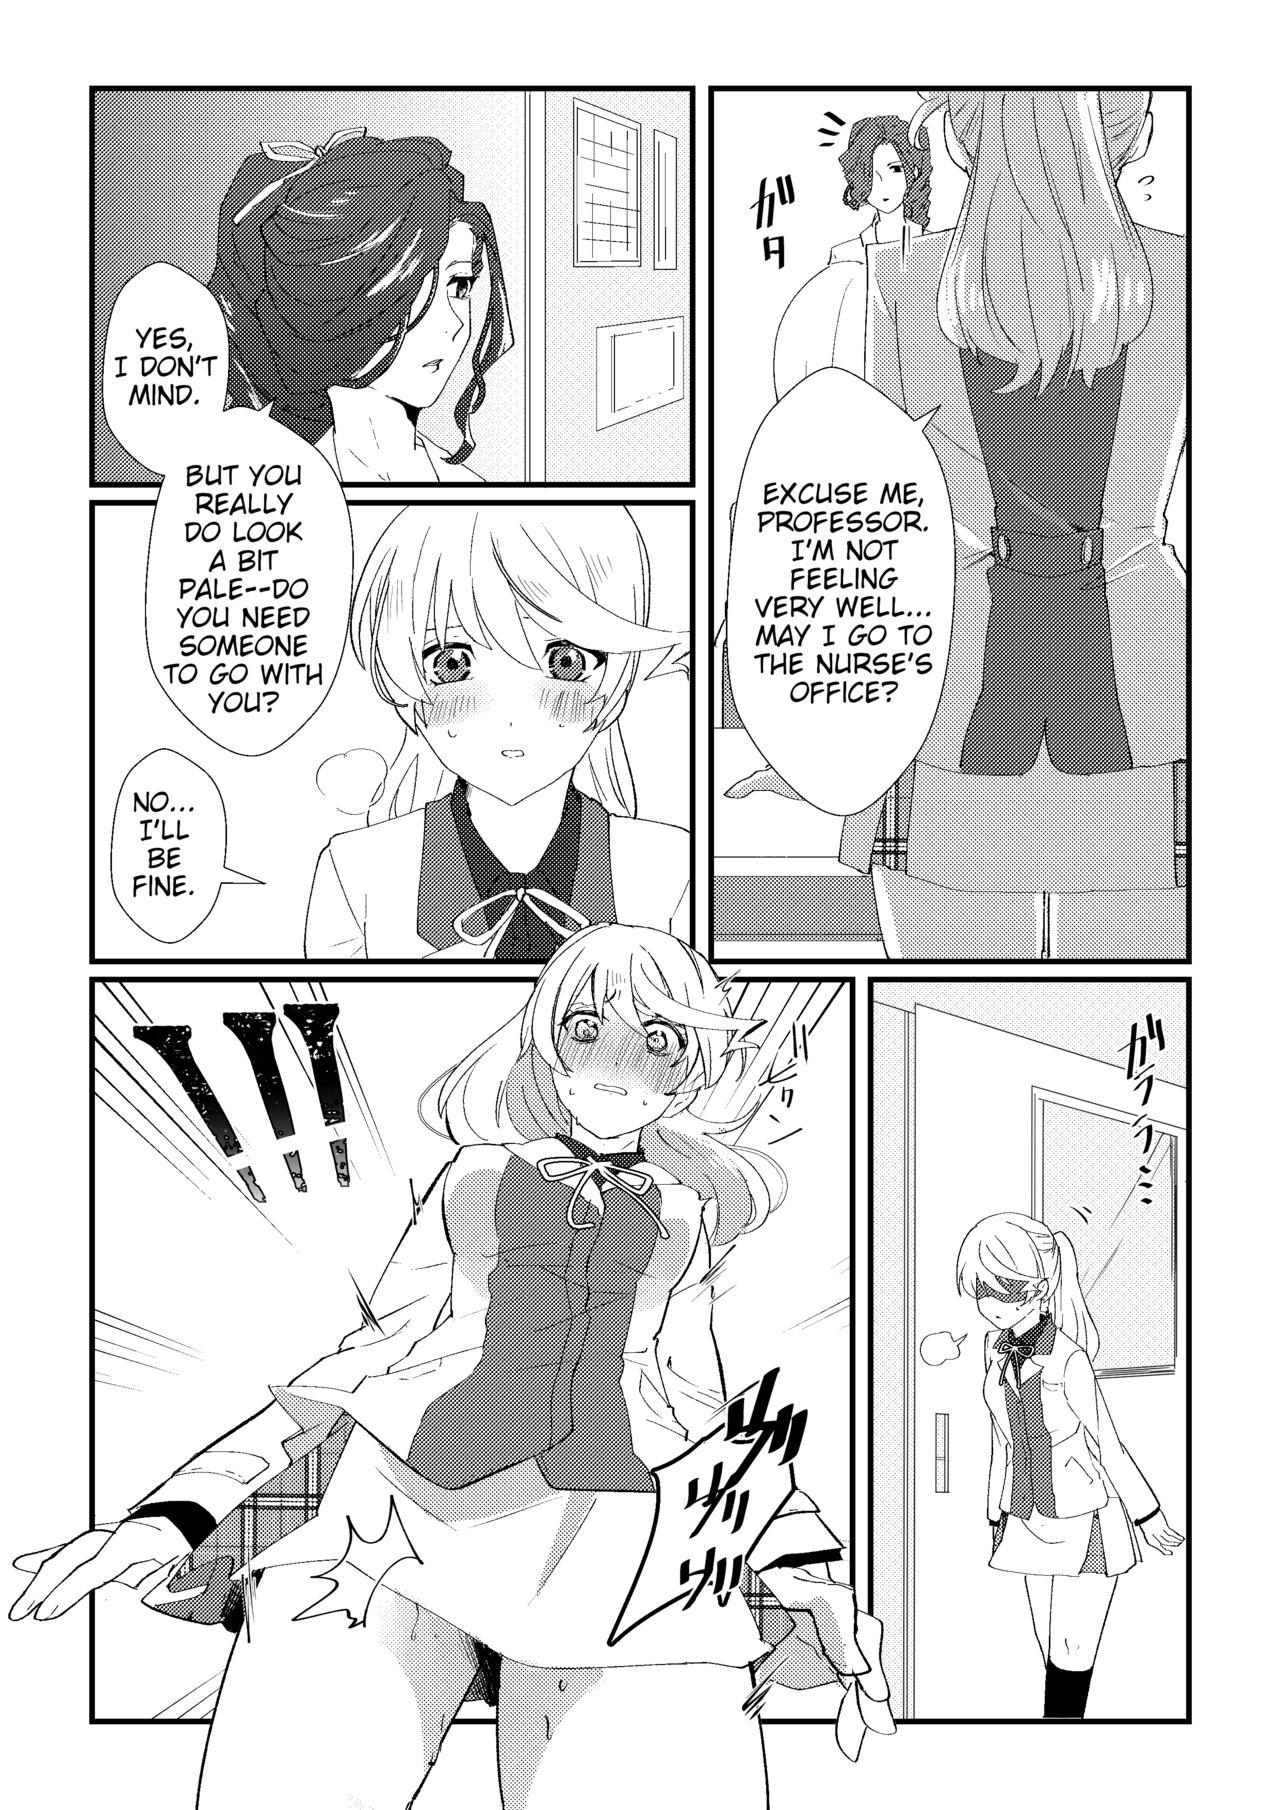 Colombian crazy about you - Tales of zestiria Spa - Page 3